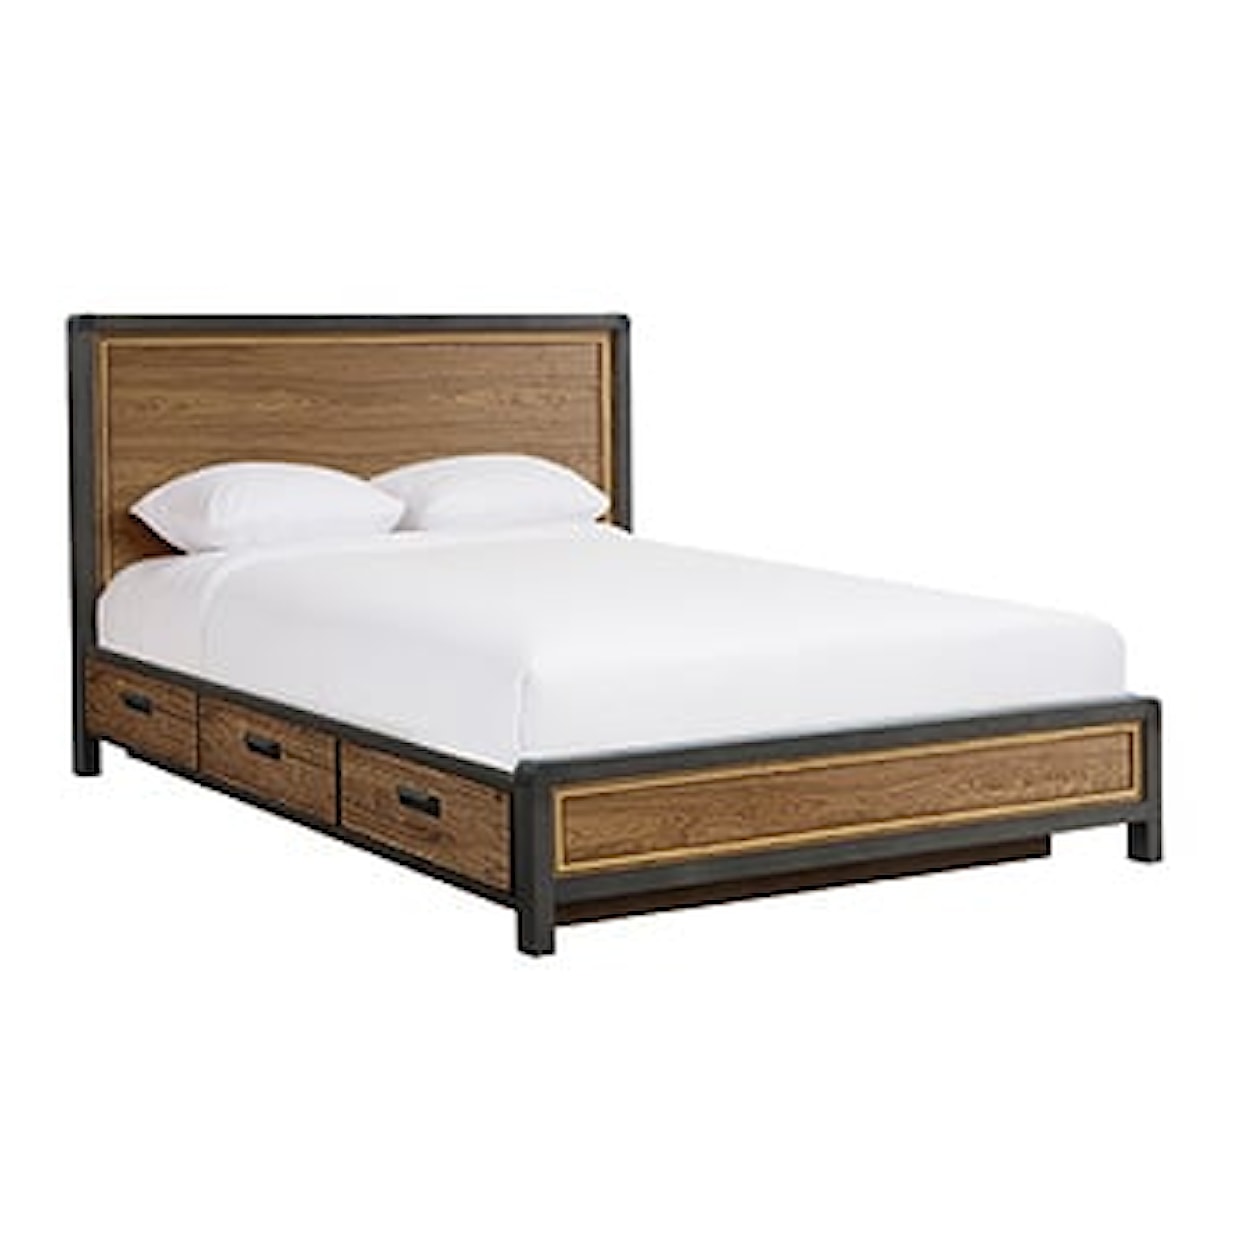 Whittier Wood Bryce California King Panel Storage Bed